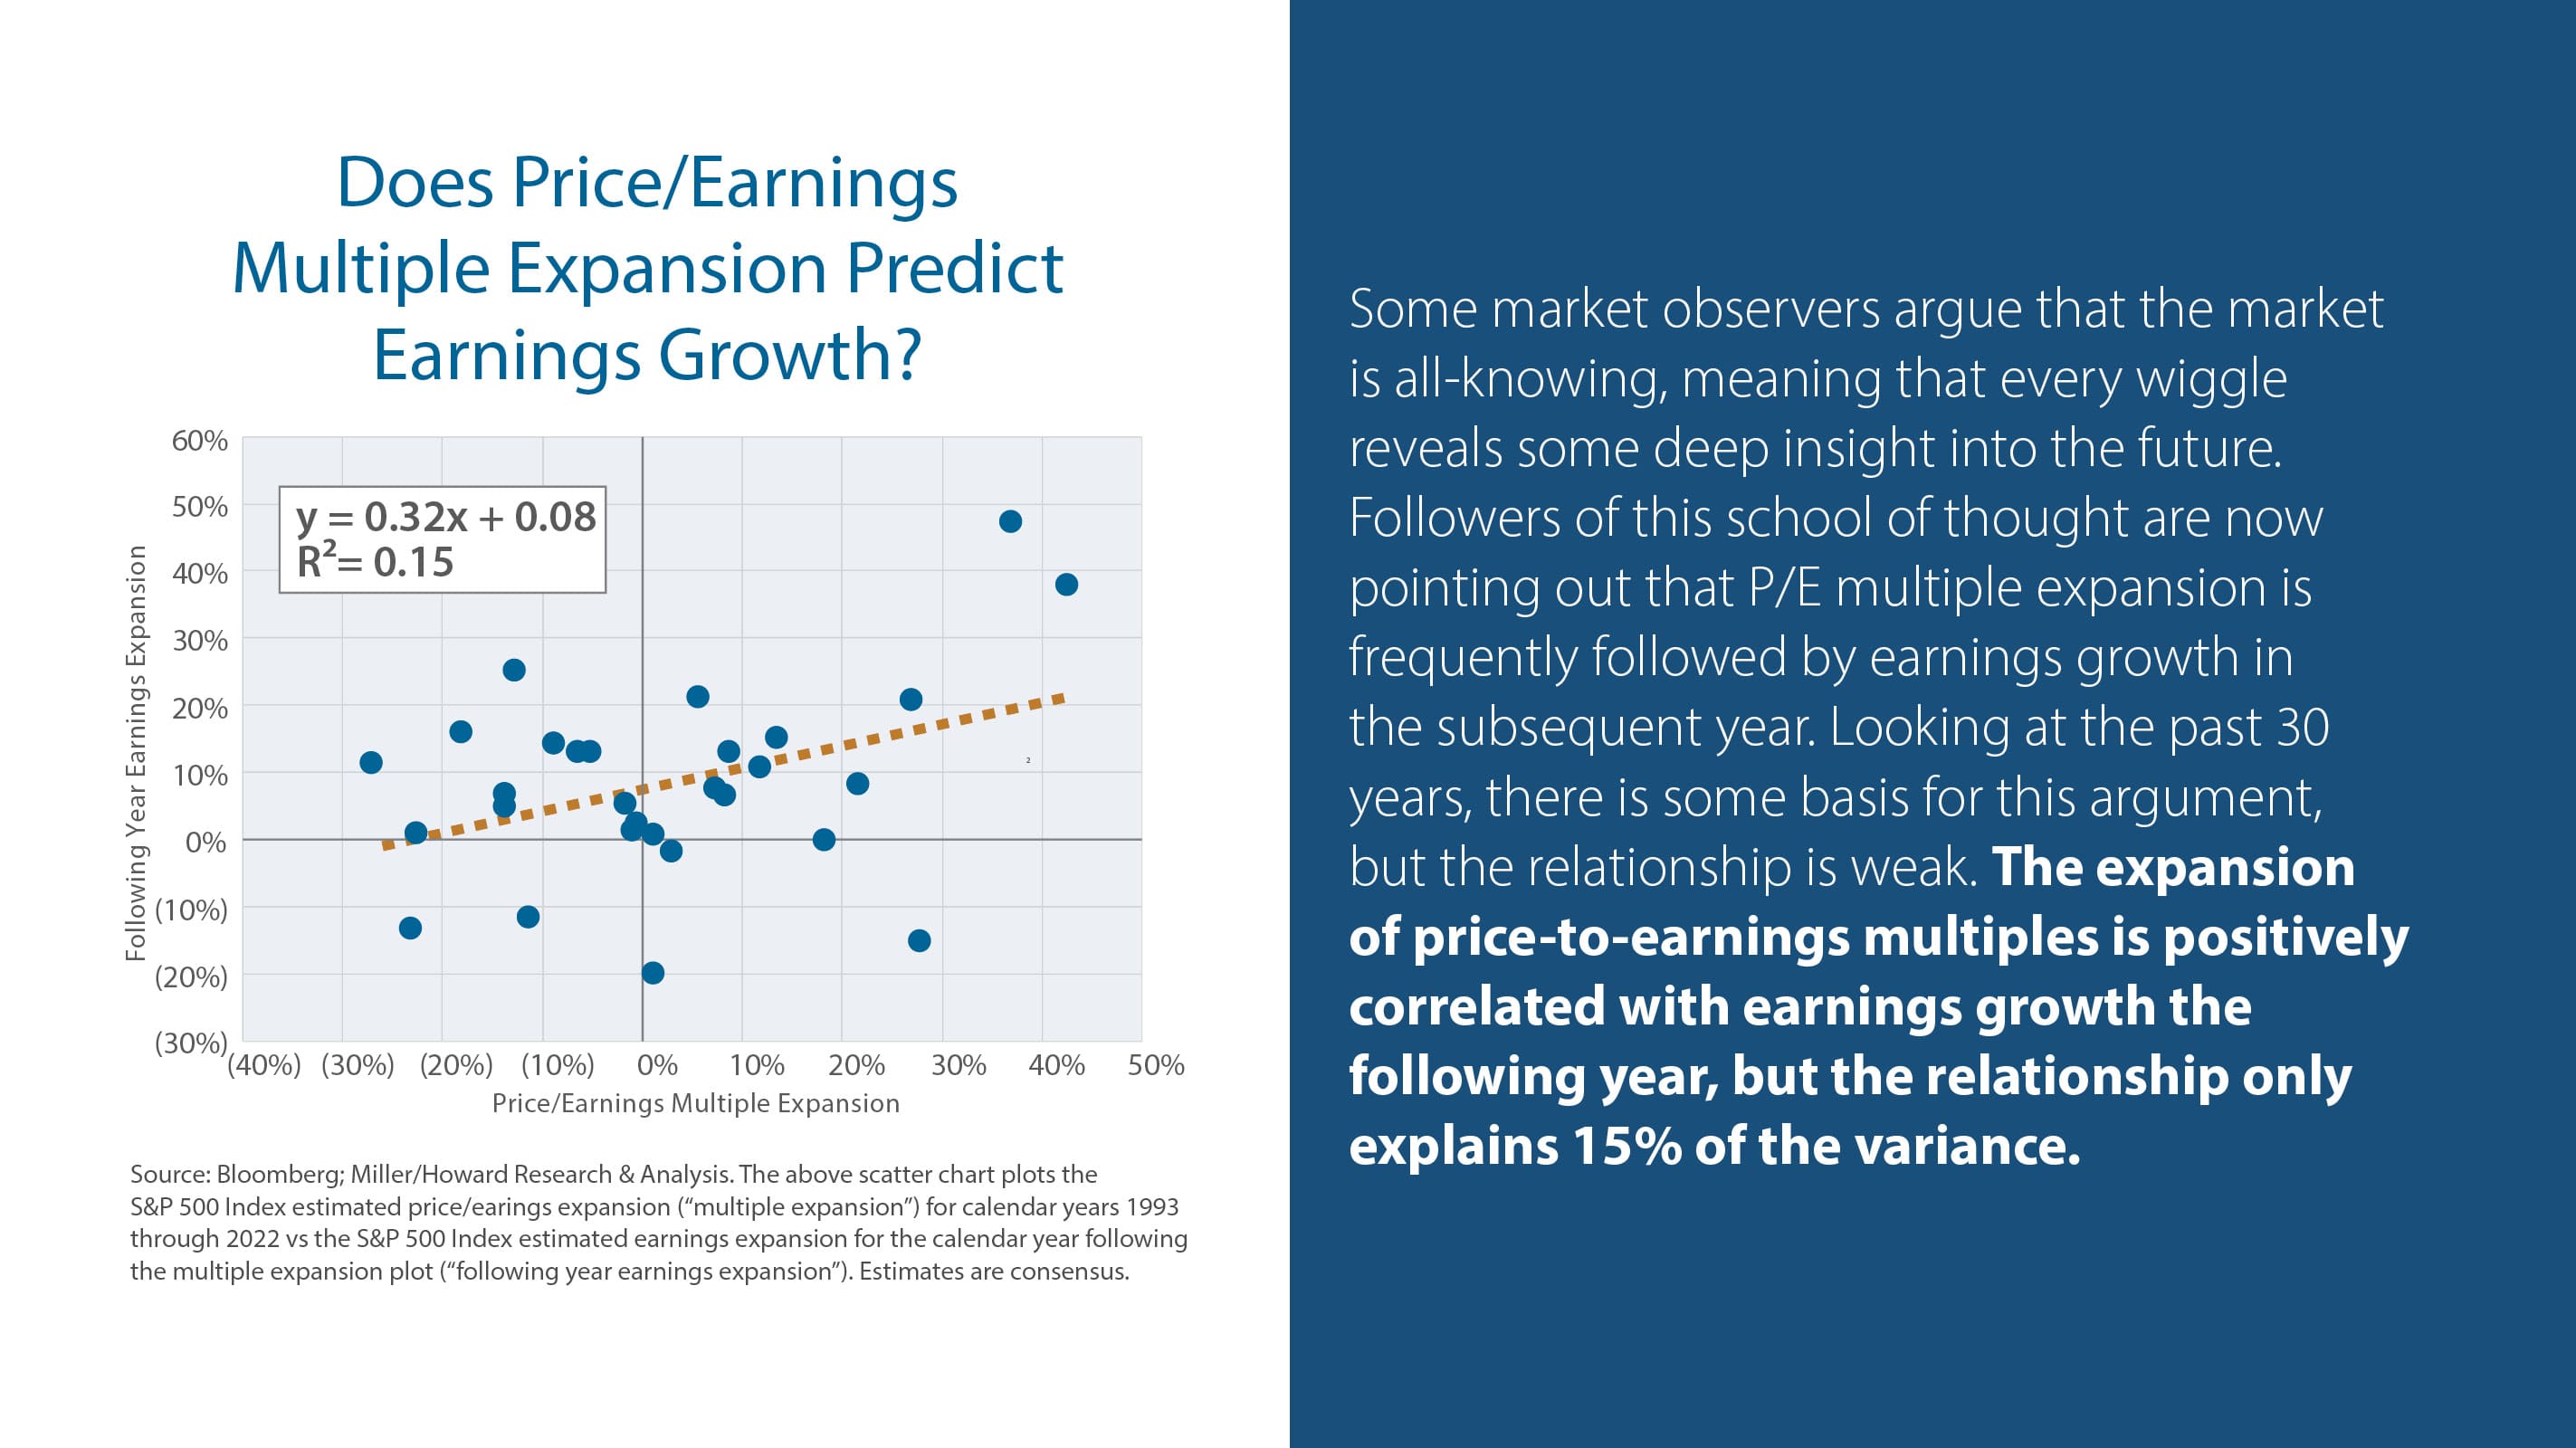 Does Price/Earnings Multiple Expansion Predict Earnings Growth?